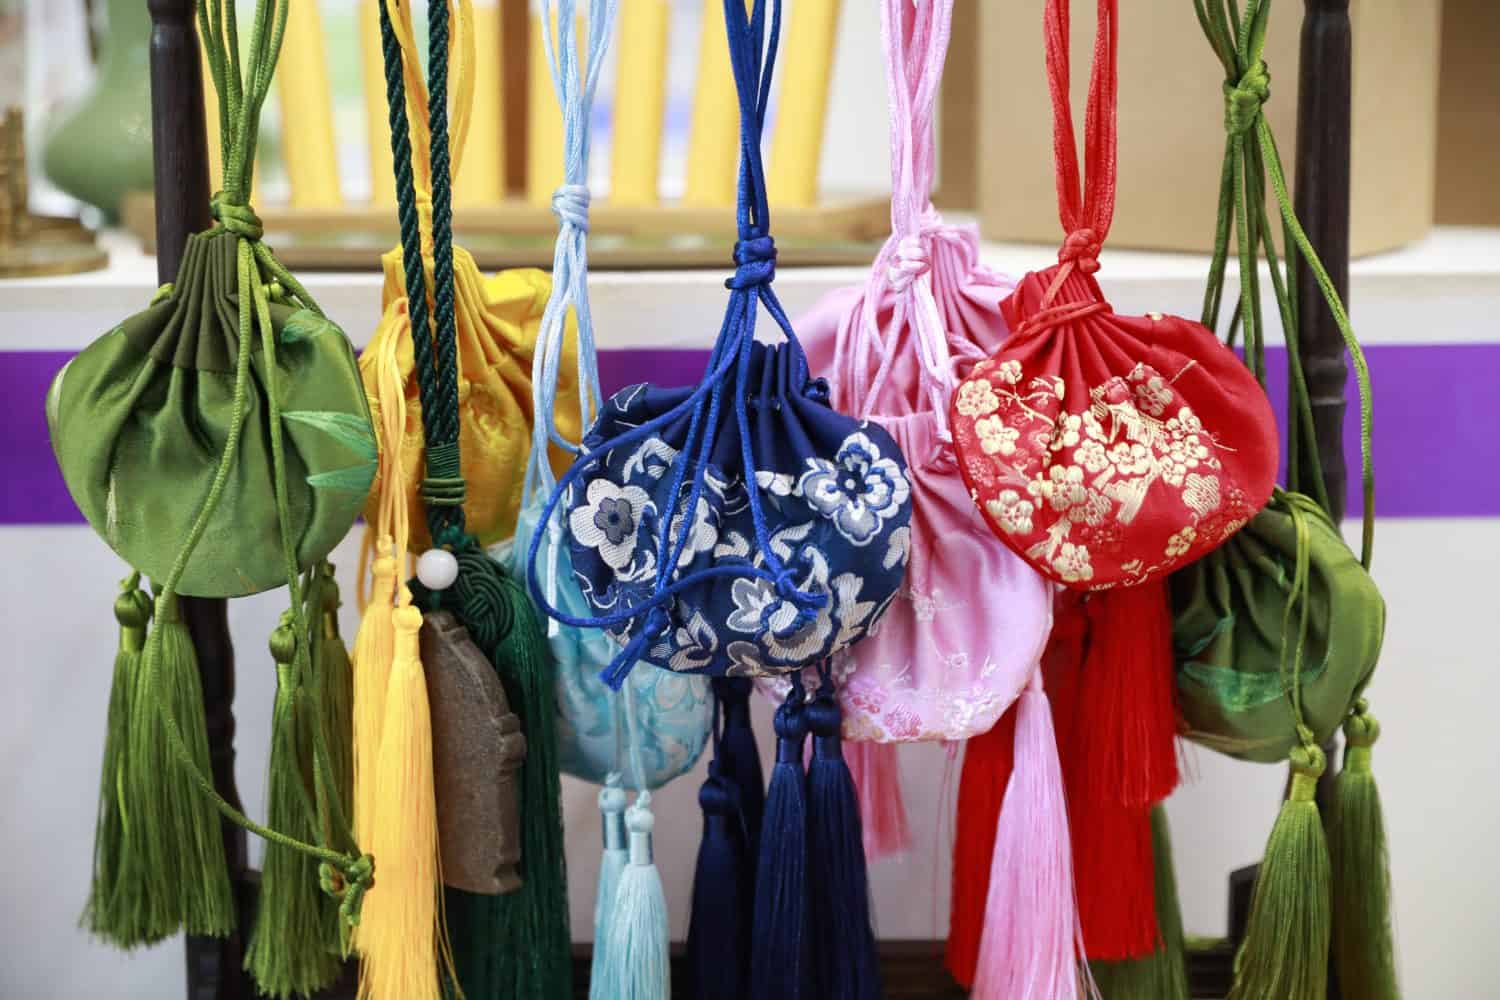 Elemental sachets and sachets of the Dragon Boat Festival are traditional decorations.